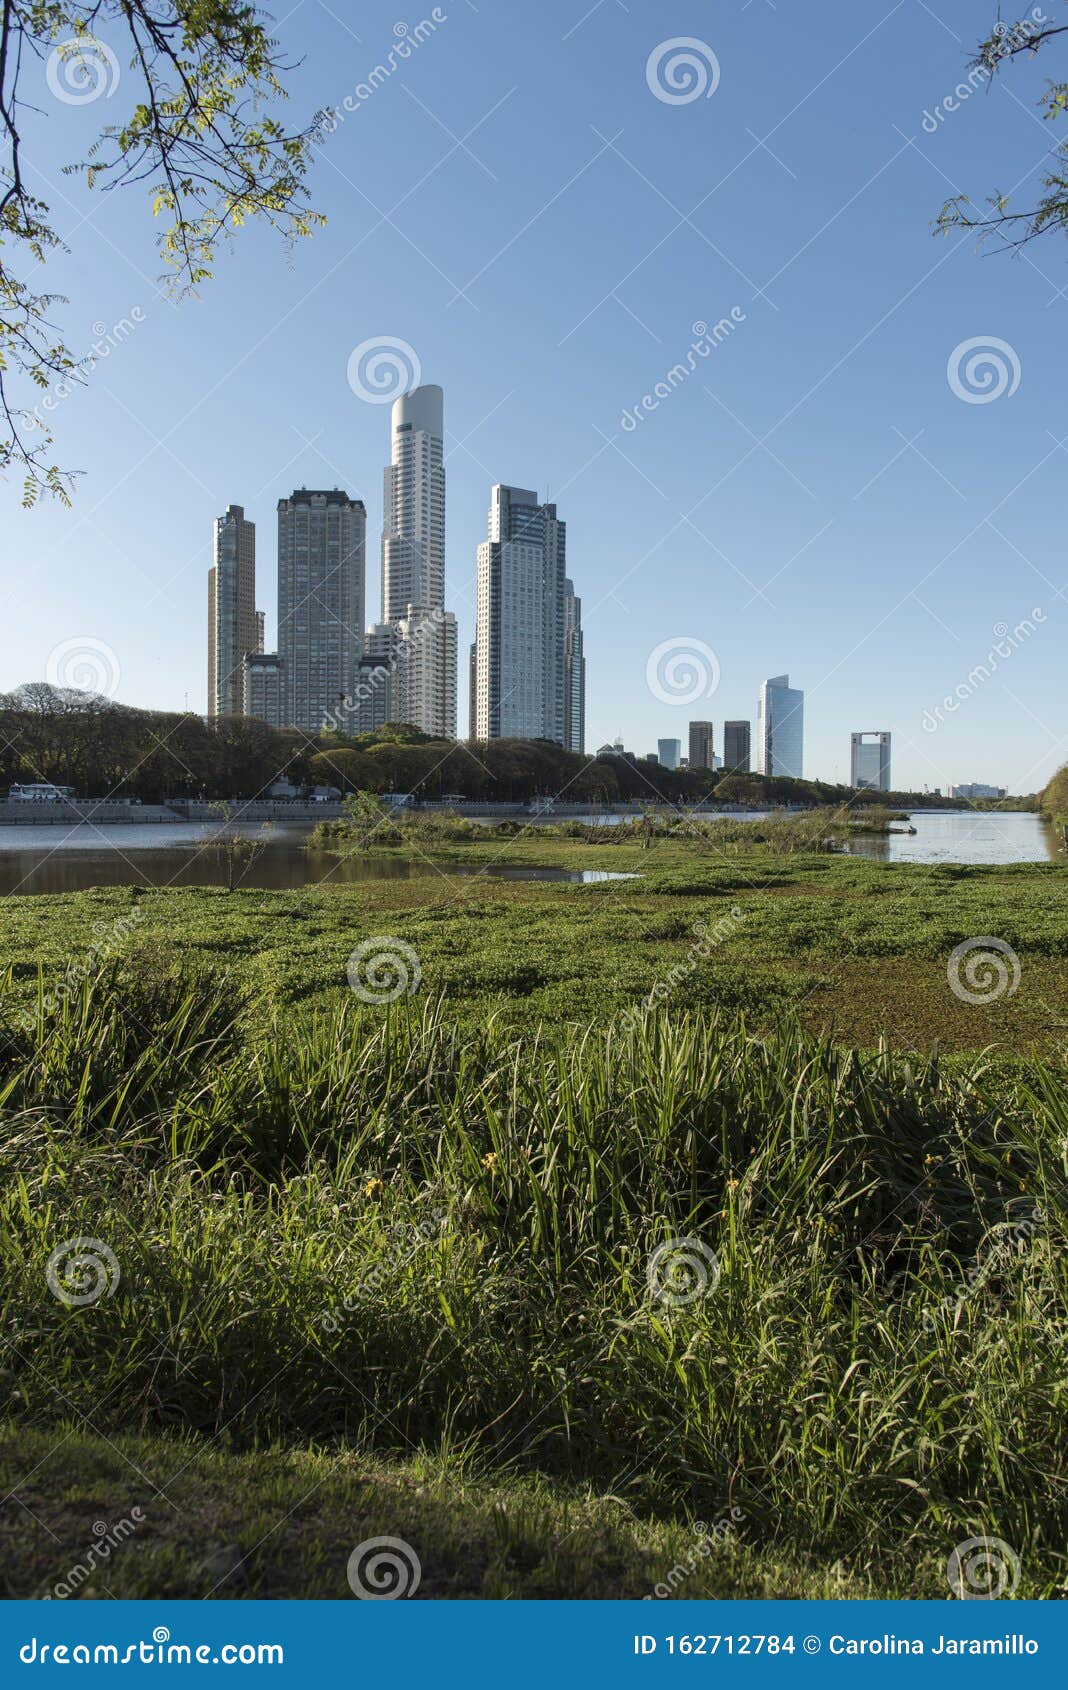 urban nature, puerto madero buildings and the costanera sur ecological reserve